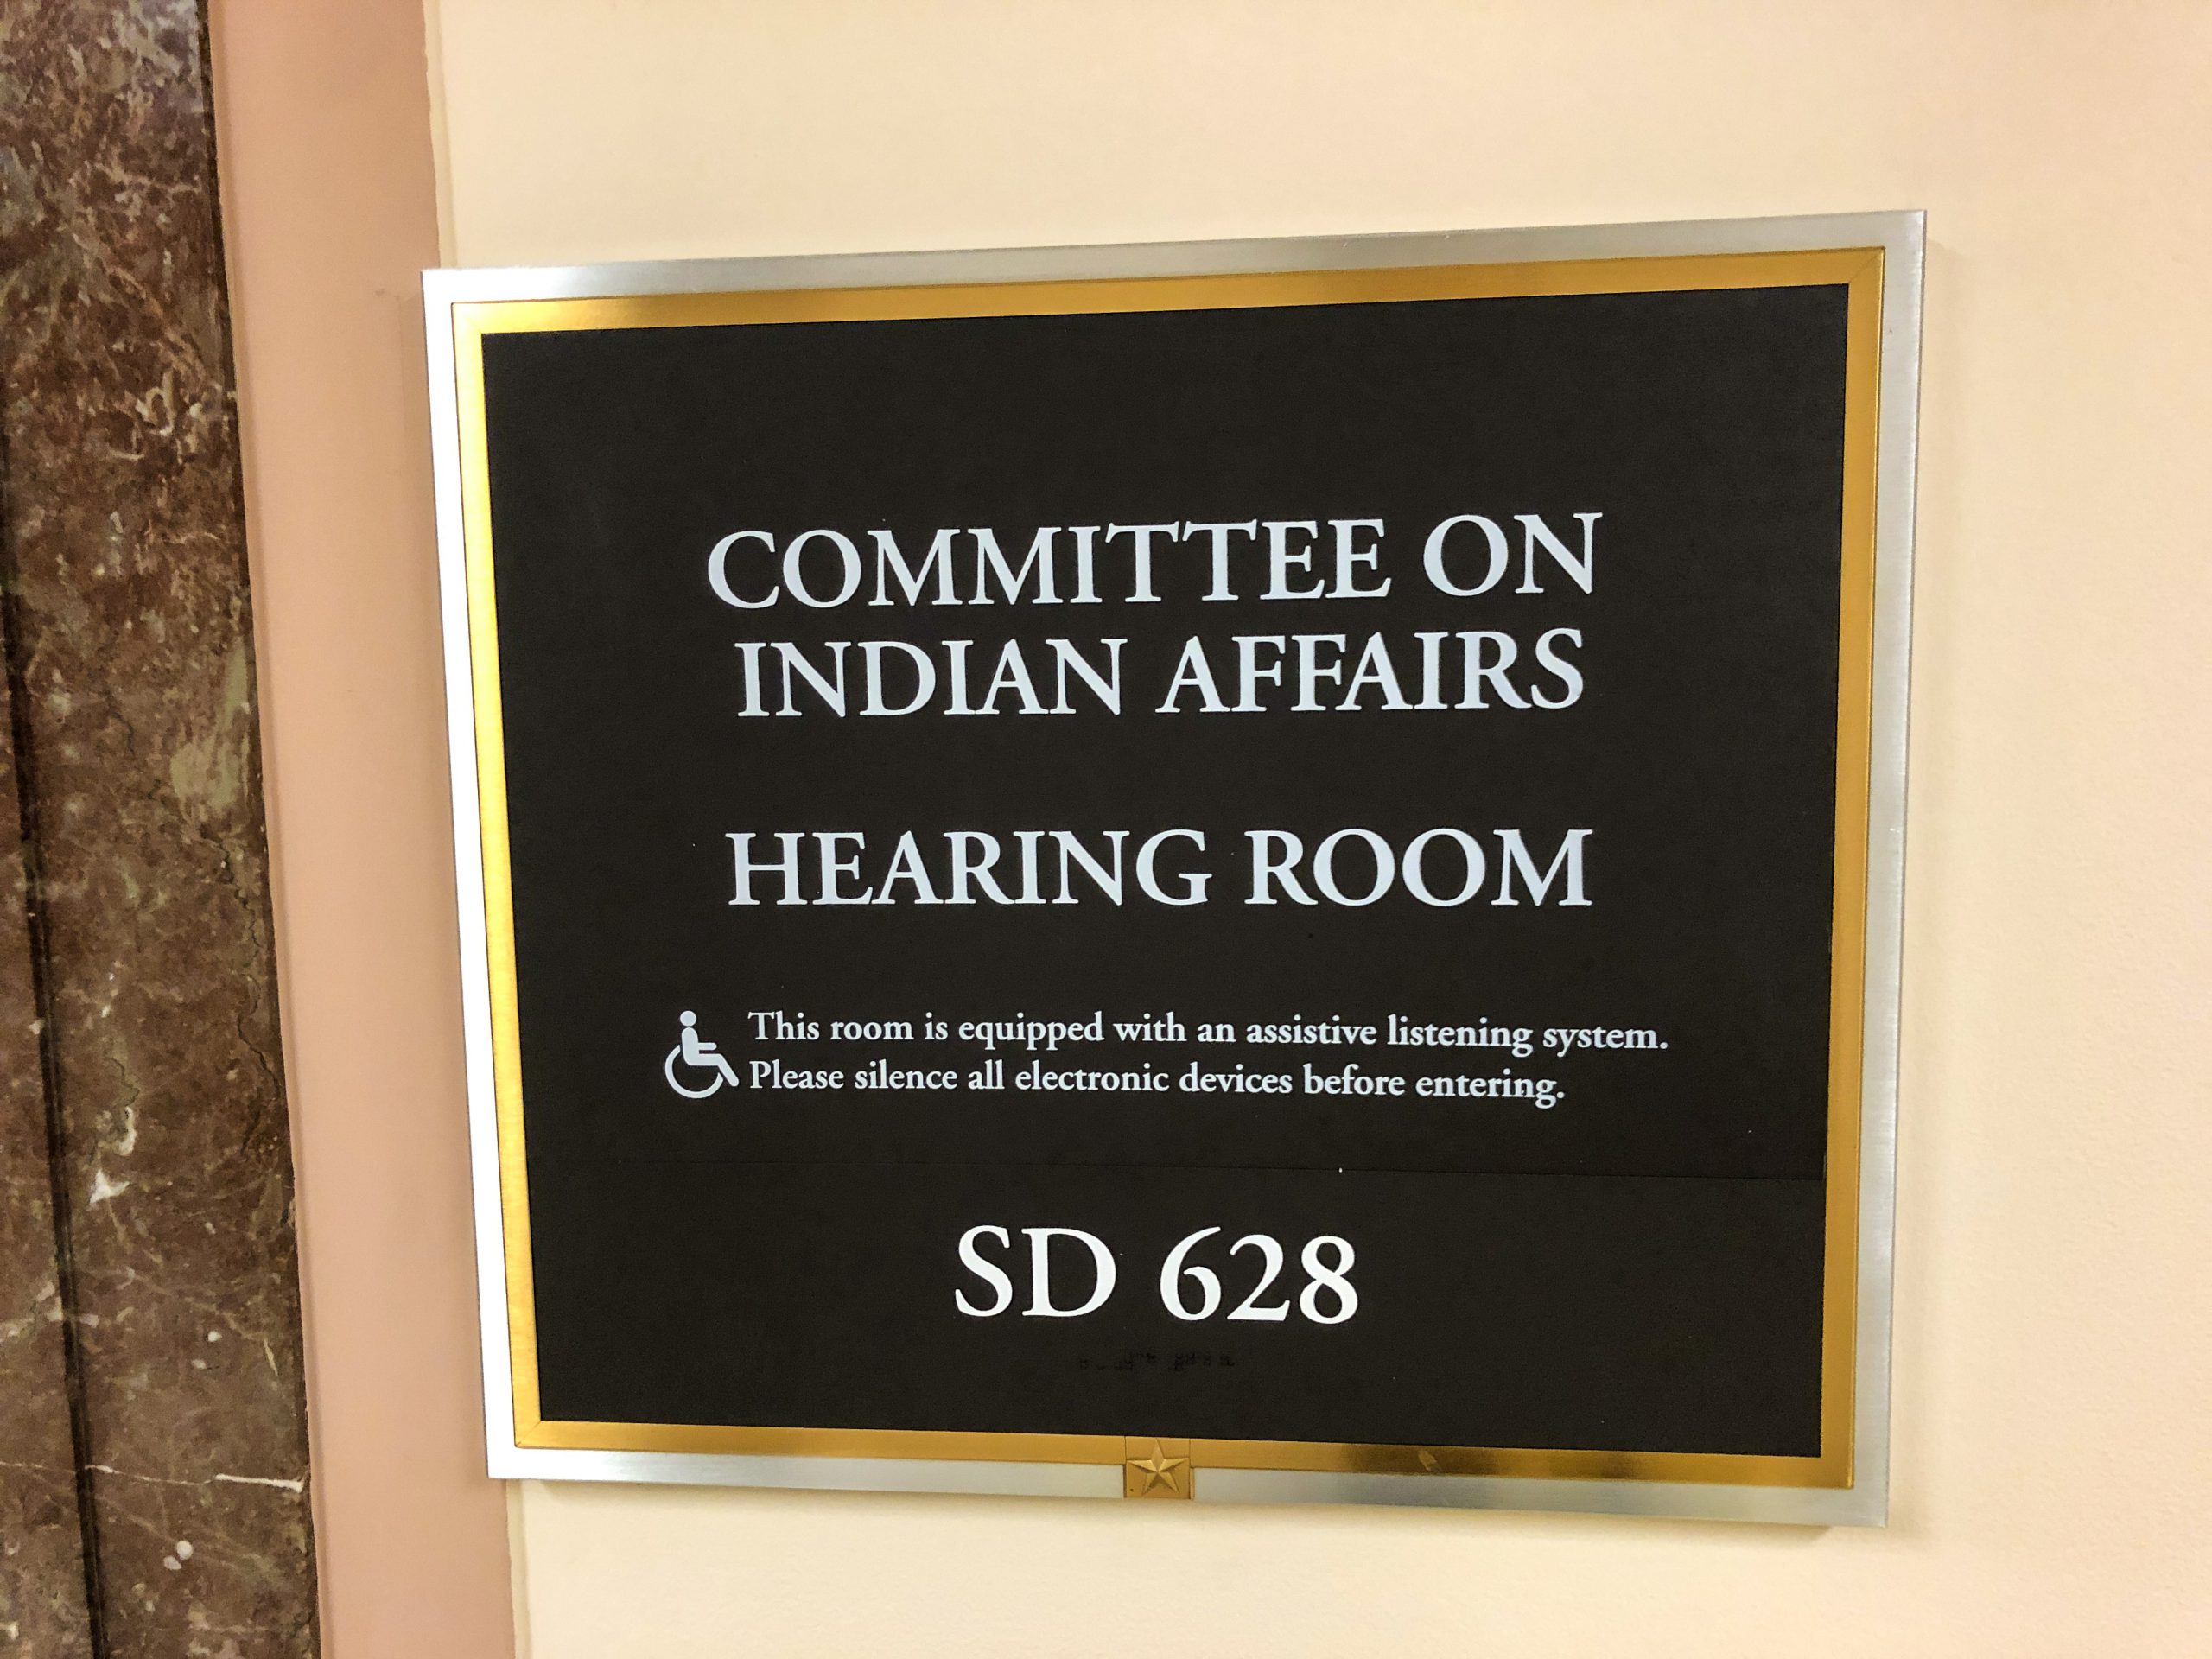 Senate Committee on Indian Affairs